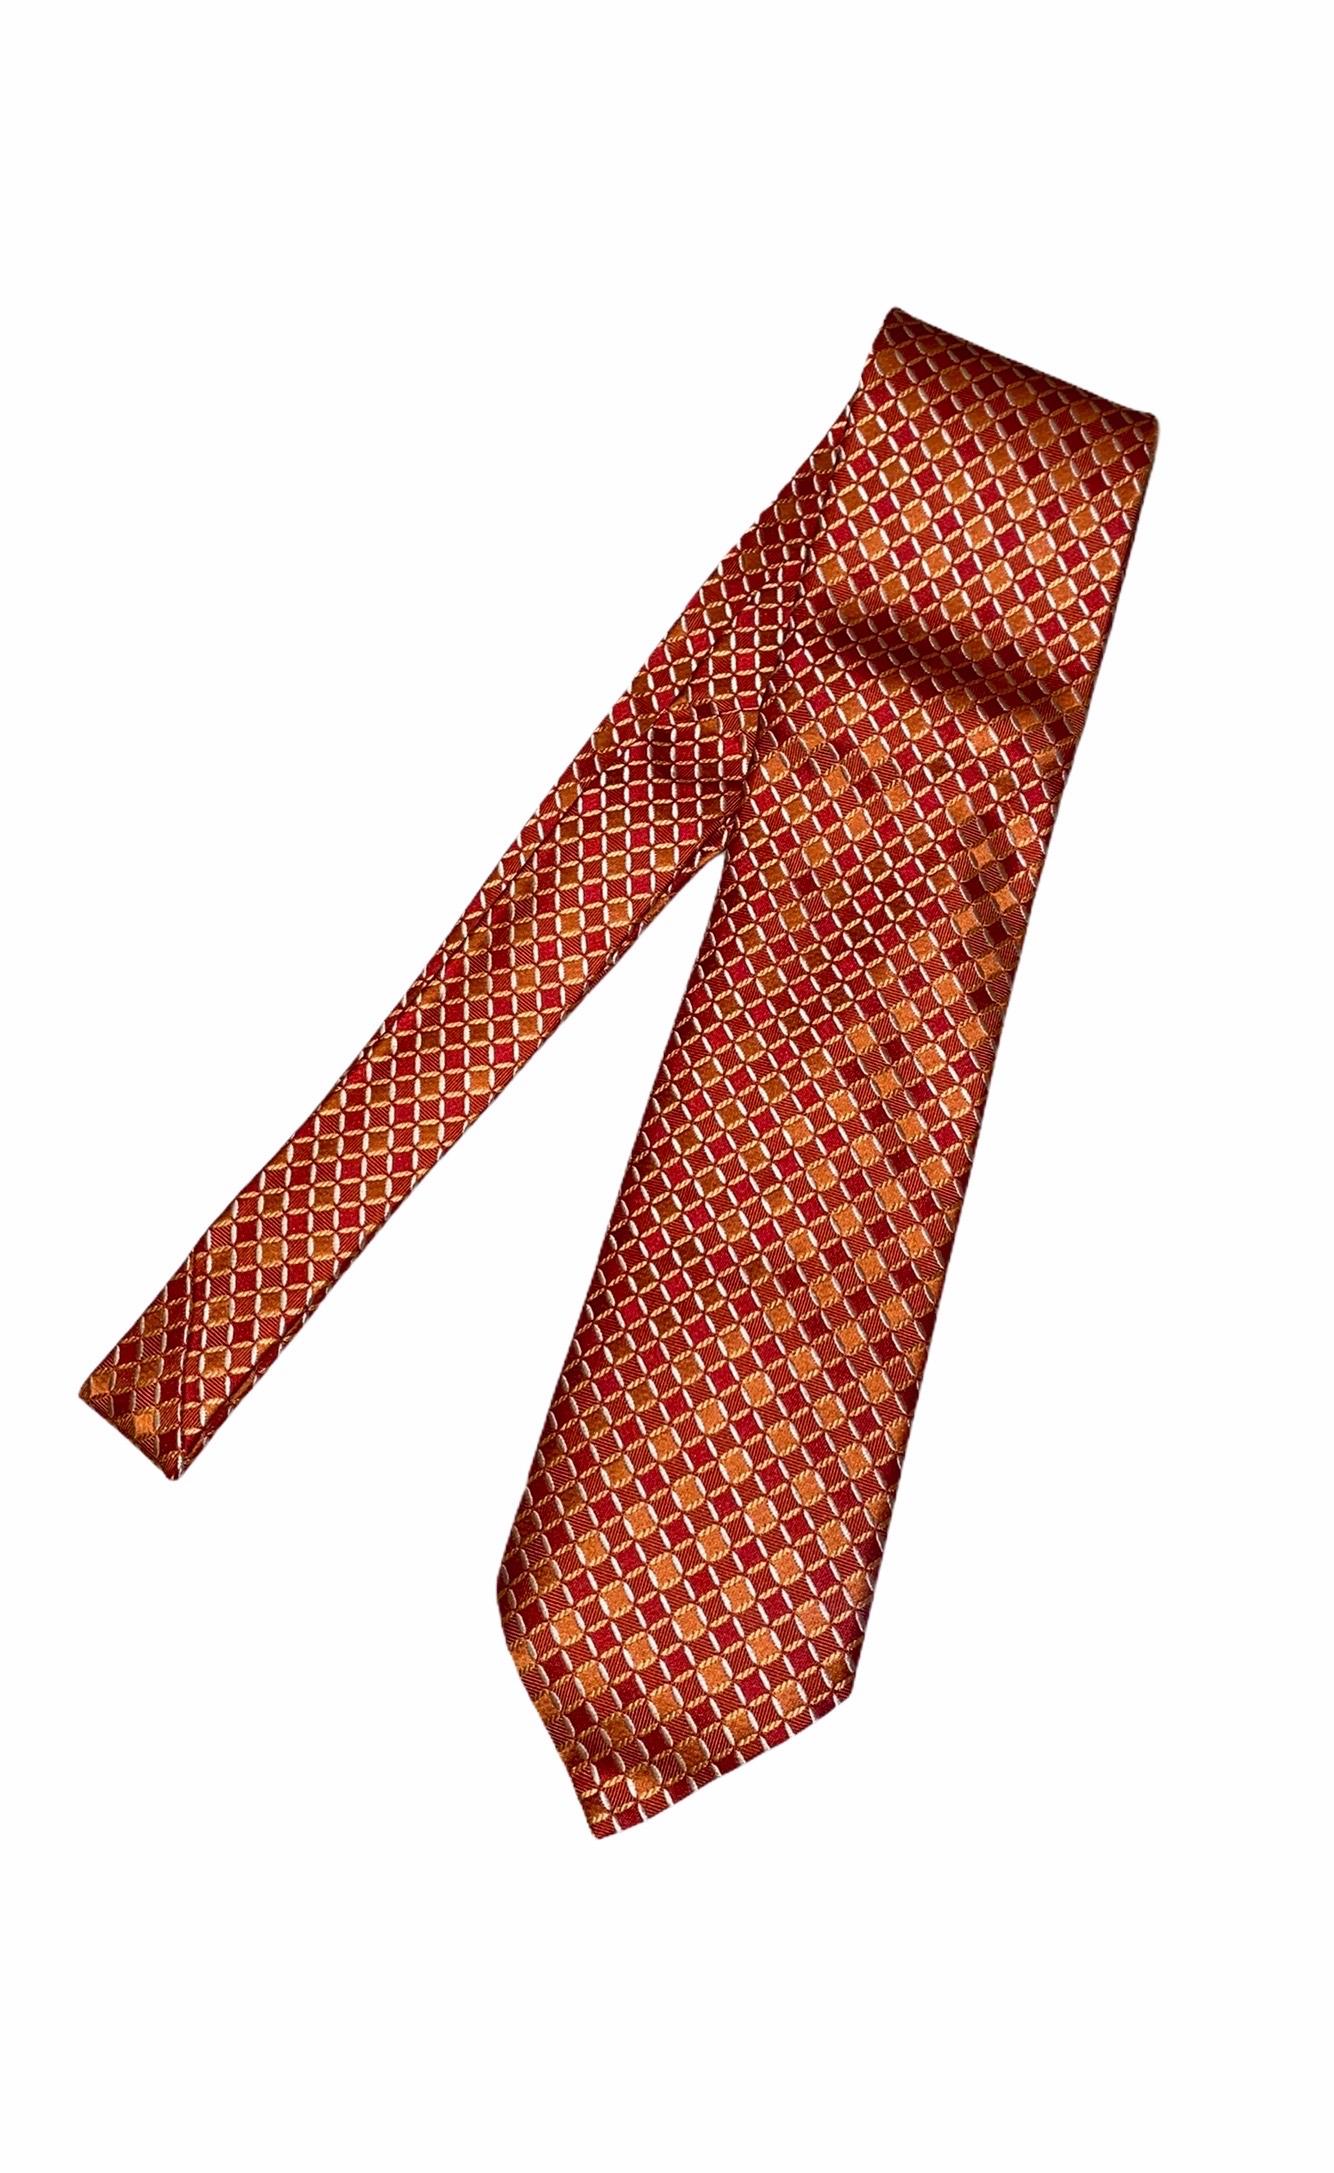 Beautiful Patek Phillipe silk tie
Limited Edition
Exclusively created by Ermenegildo Zegna for Patek Phillippe
A true signature item that will last you for many years
100% Silk
Made in Italy
Brandnew, never worn
Comes in original tie box